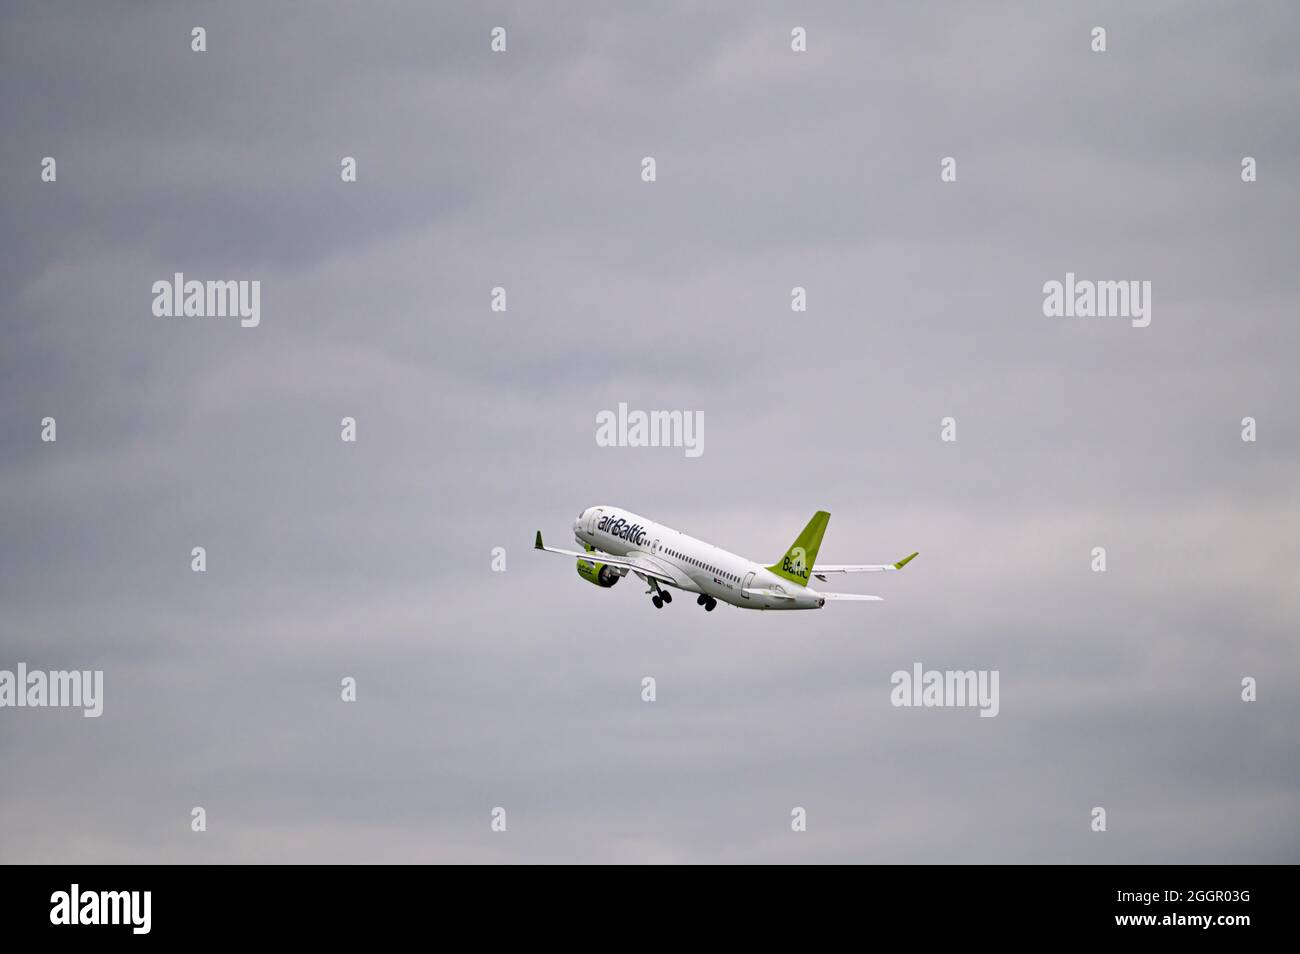 Riga, Latvia - August 31, 2021: AirBaltic Airbus A220-300 YL-AAS takes off from RIX International Airport on cloudy autumn day Stock Photo